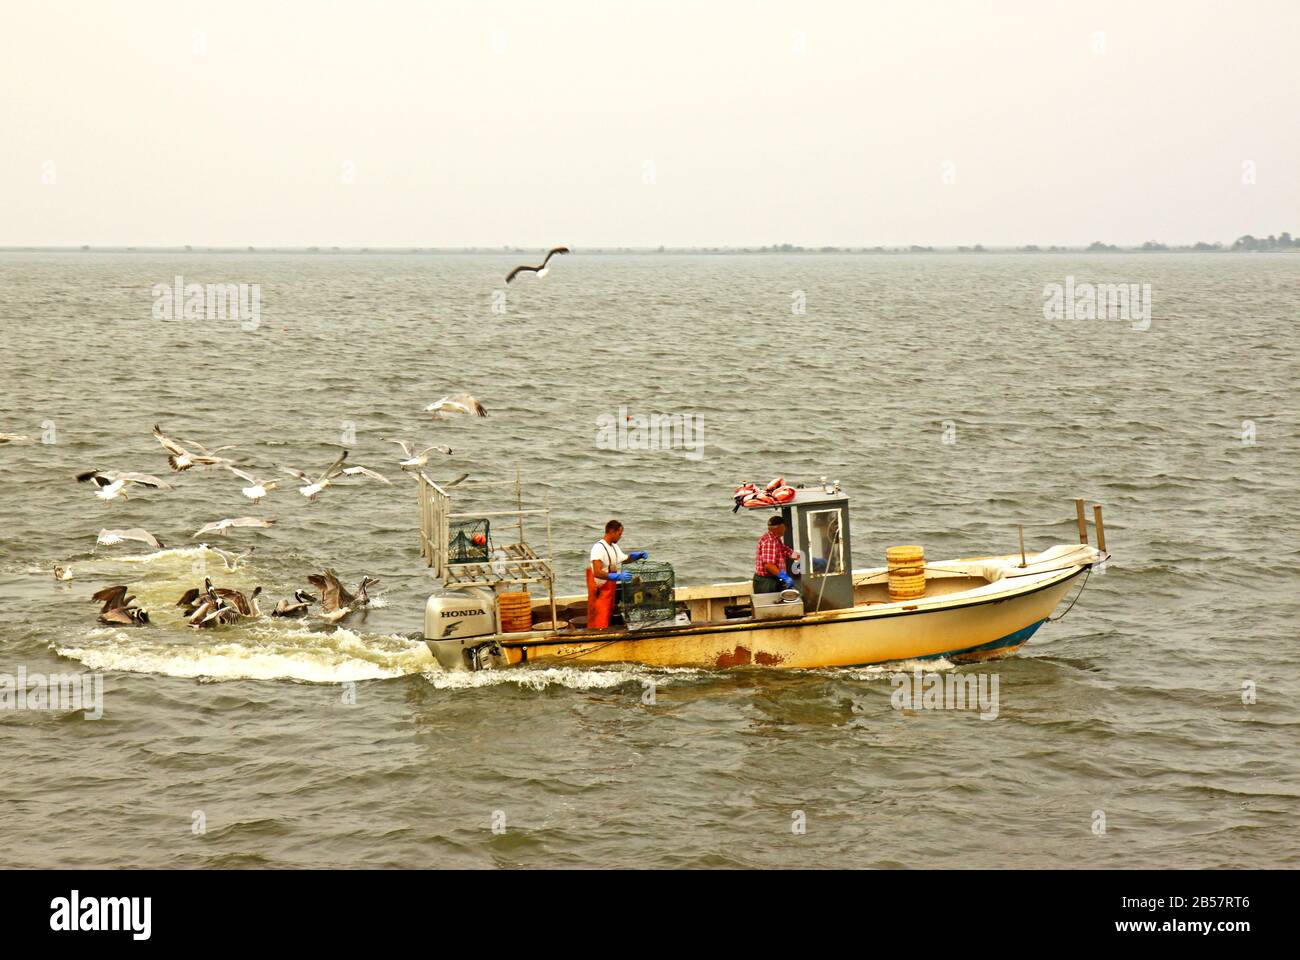 Fishermen mobbed by gulls and pelicans while checking crab pots in Pamlico Sound off the fishing village of Wanchese. Stock Photo